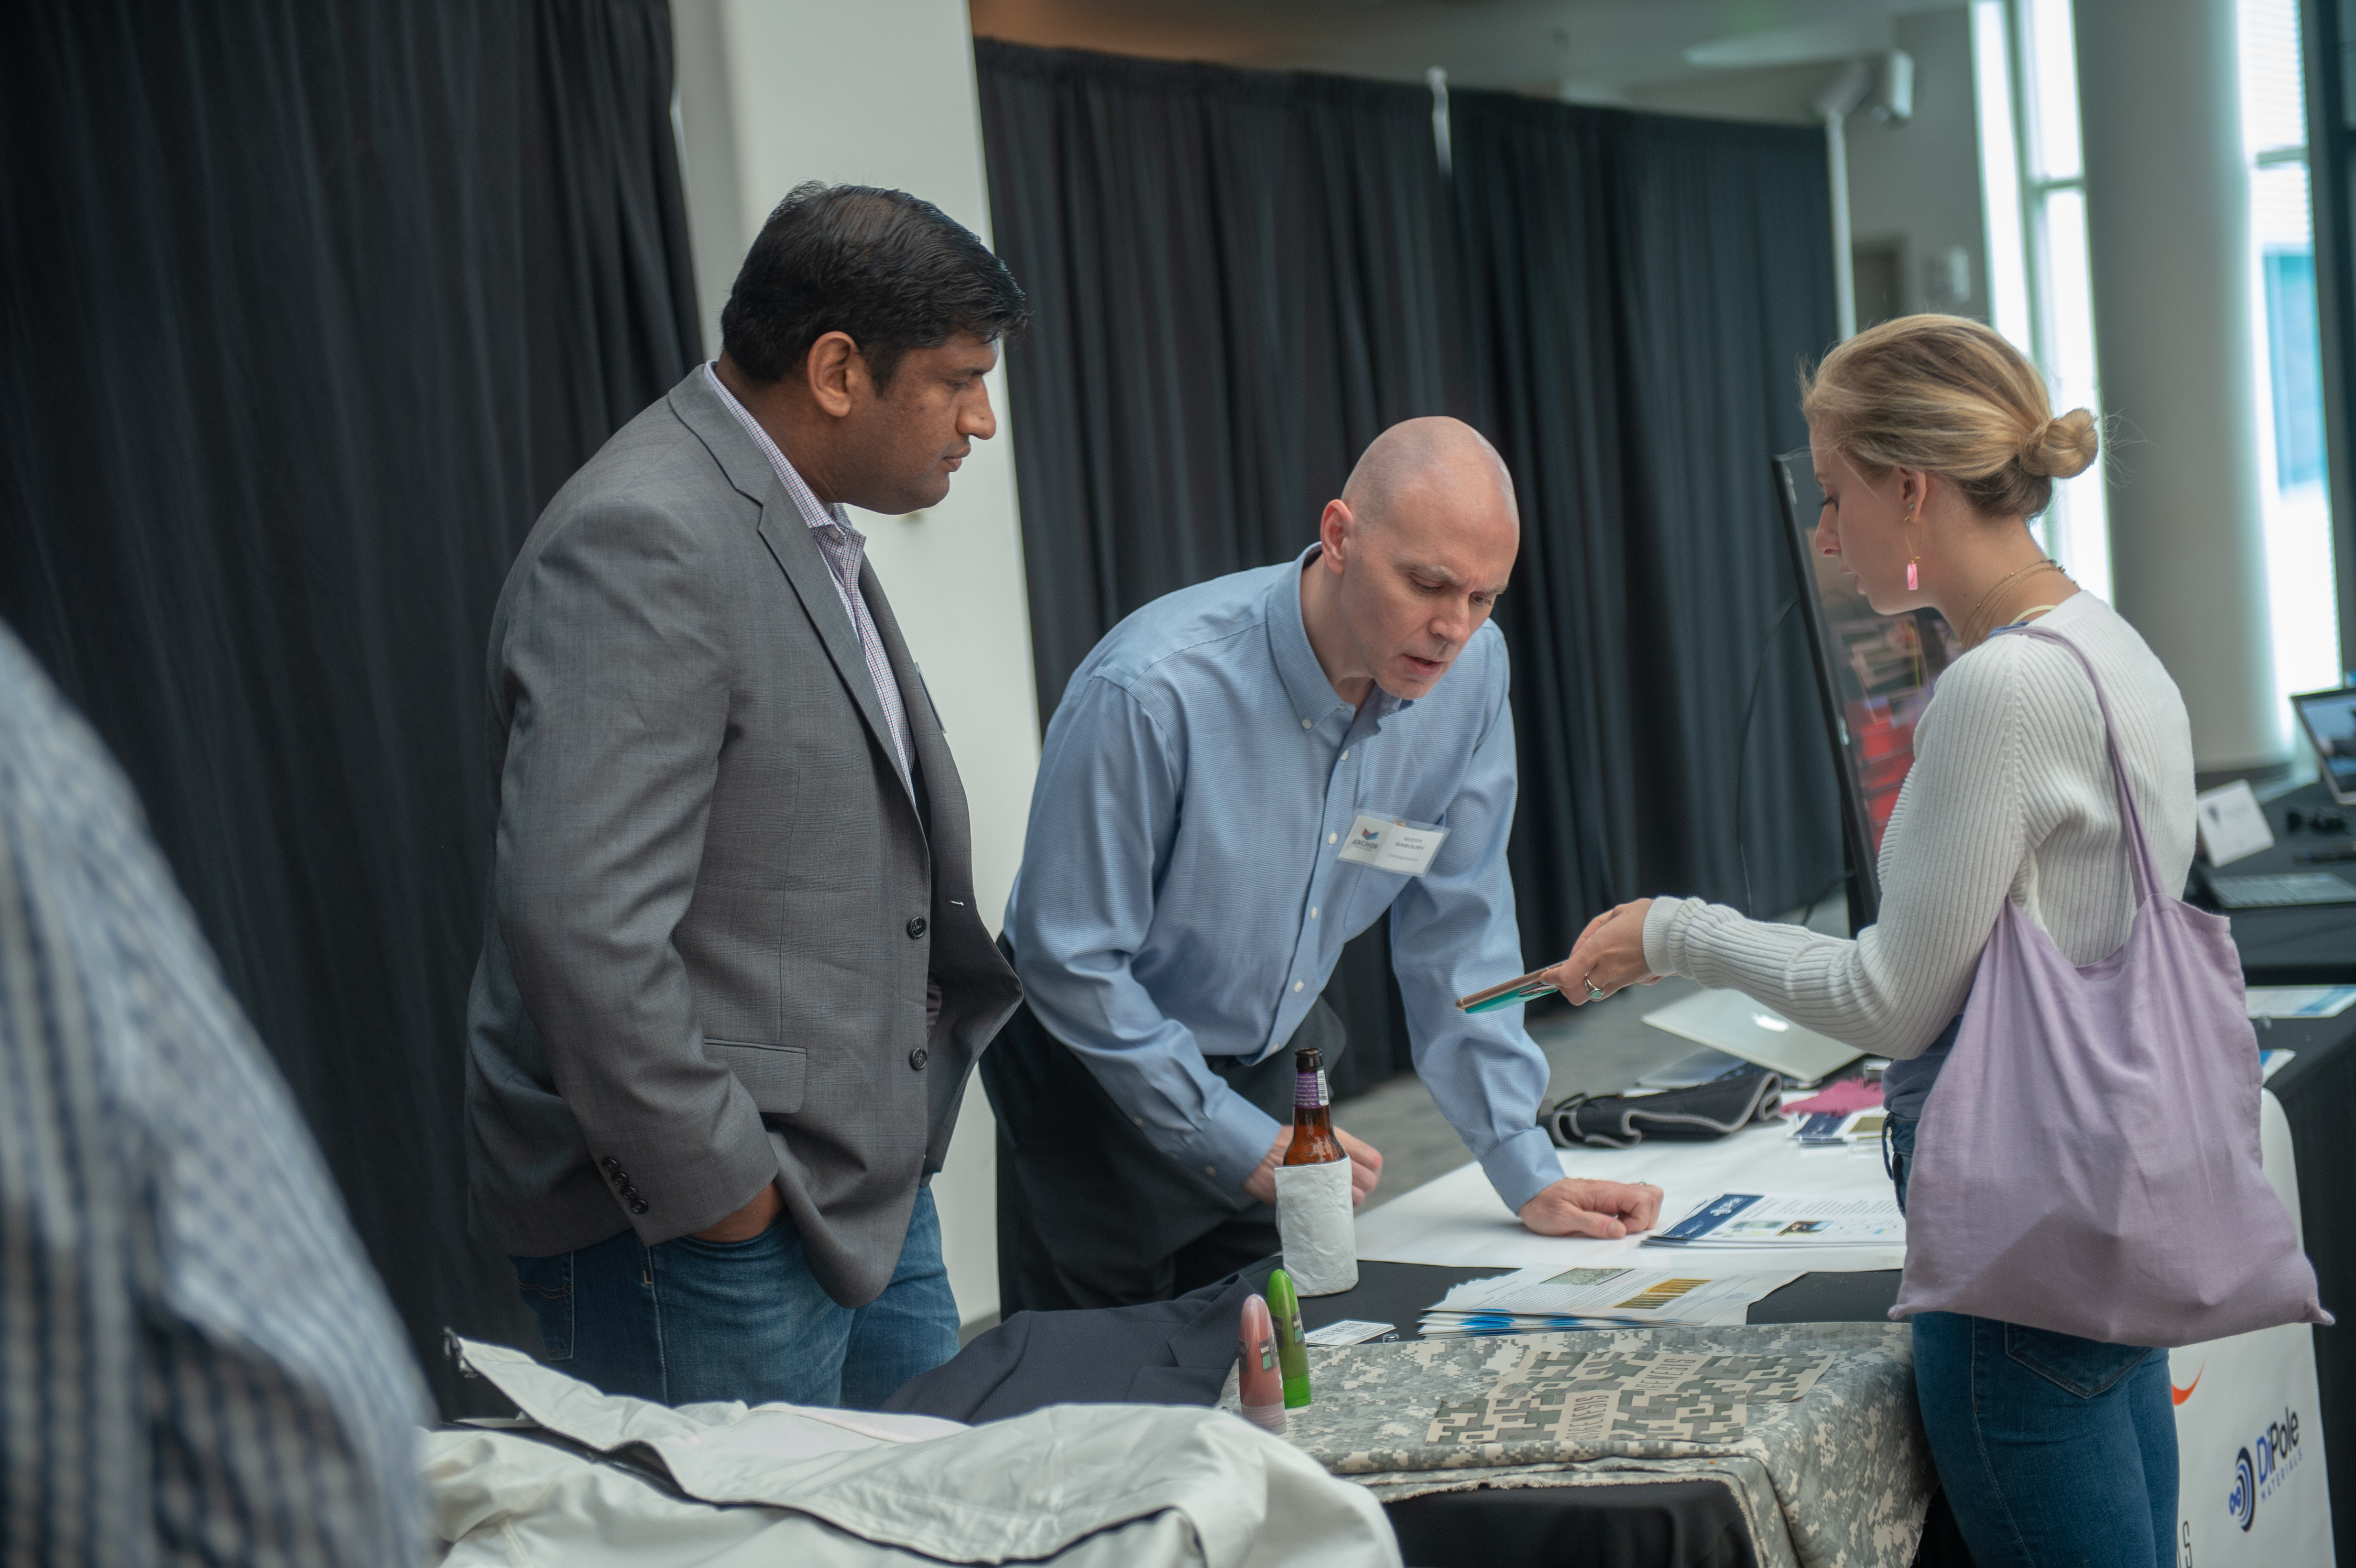 Attendees met inventors and makers who are creating exciting new smart garments, techical textiles, and wearables right here in Baltimore. 